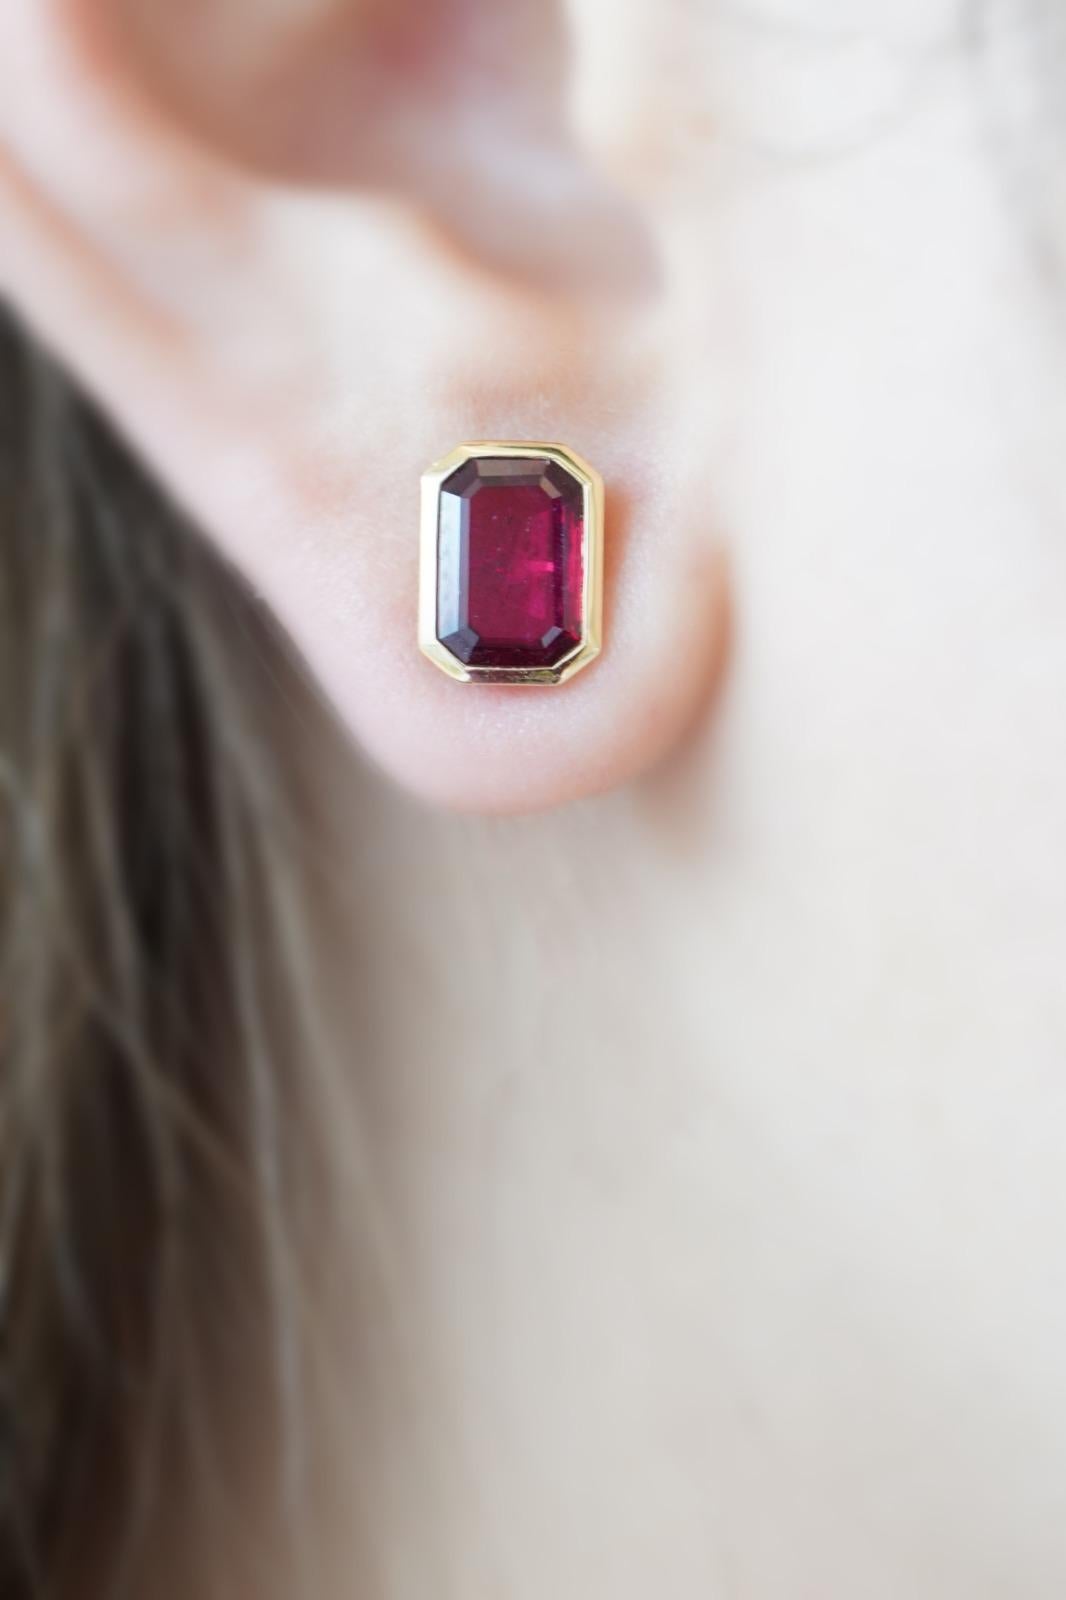 18K yellow gold with natural ruby totaling 3.18 carat 2.15 grams